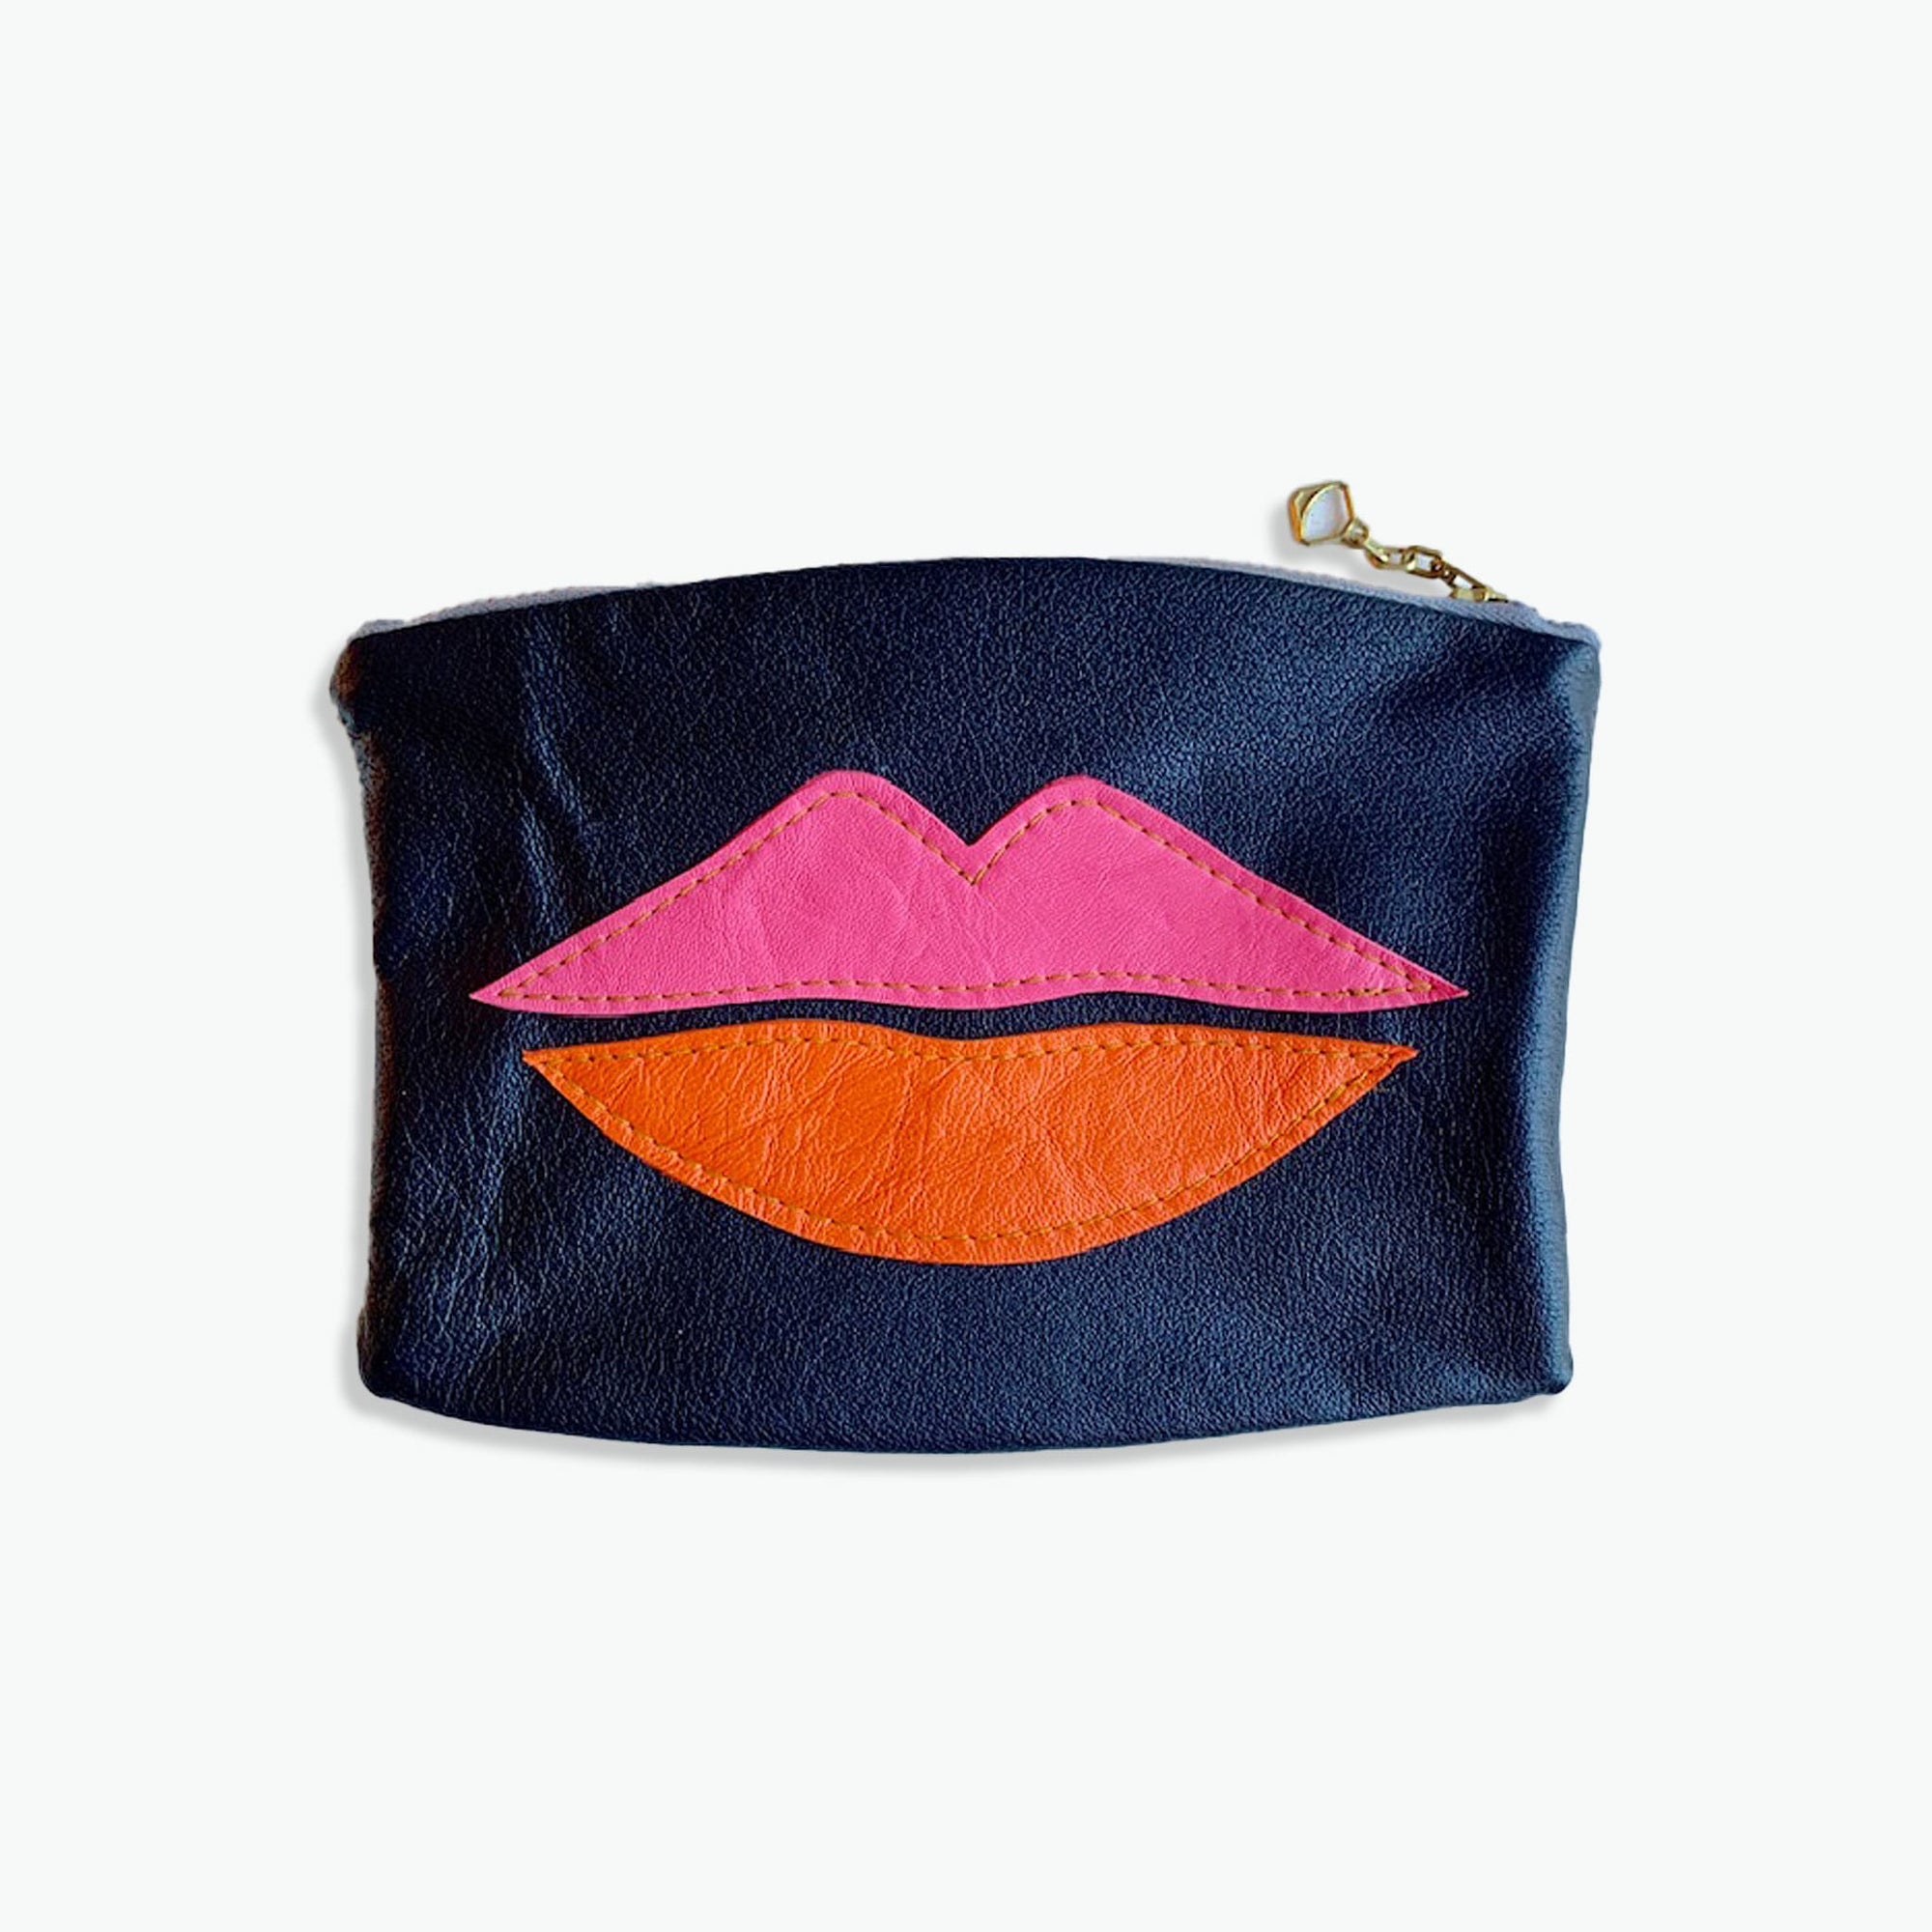 Recycled Leather Pouch coral pink Lips